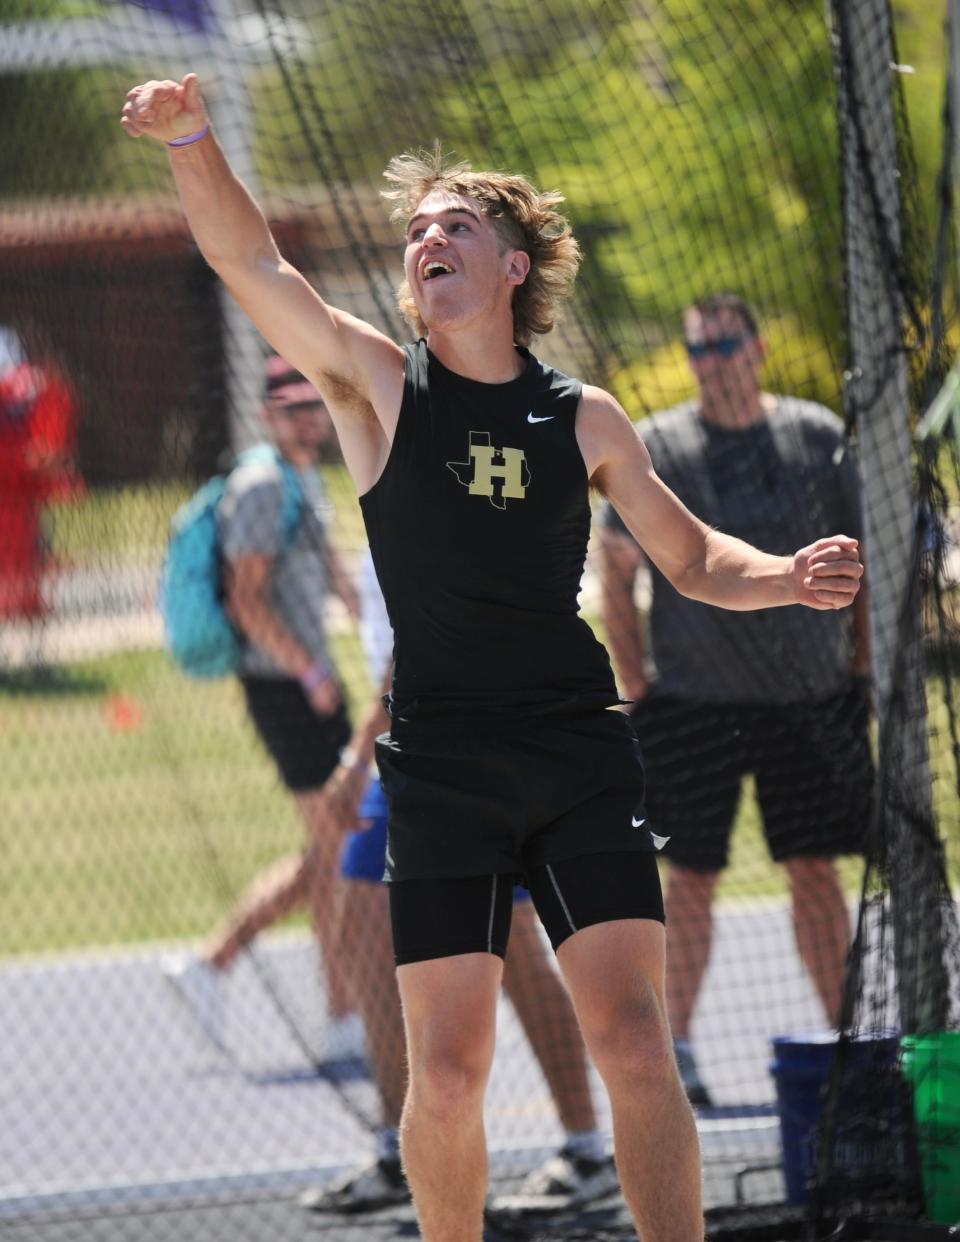 Henrietta's Klein Essler throws in the discus at the Region I-3A track and field meet at Abilene Christian University on Saturday, April 30, 2022.